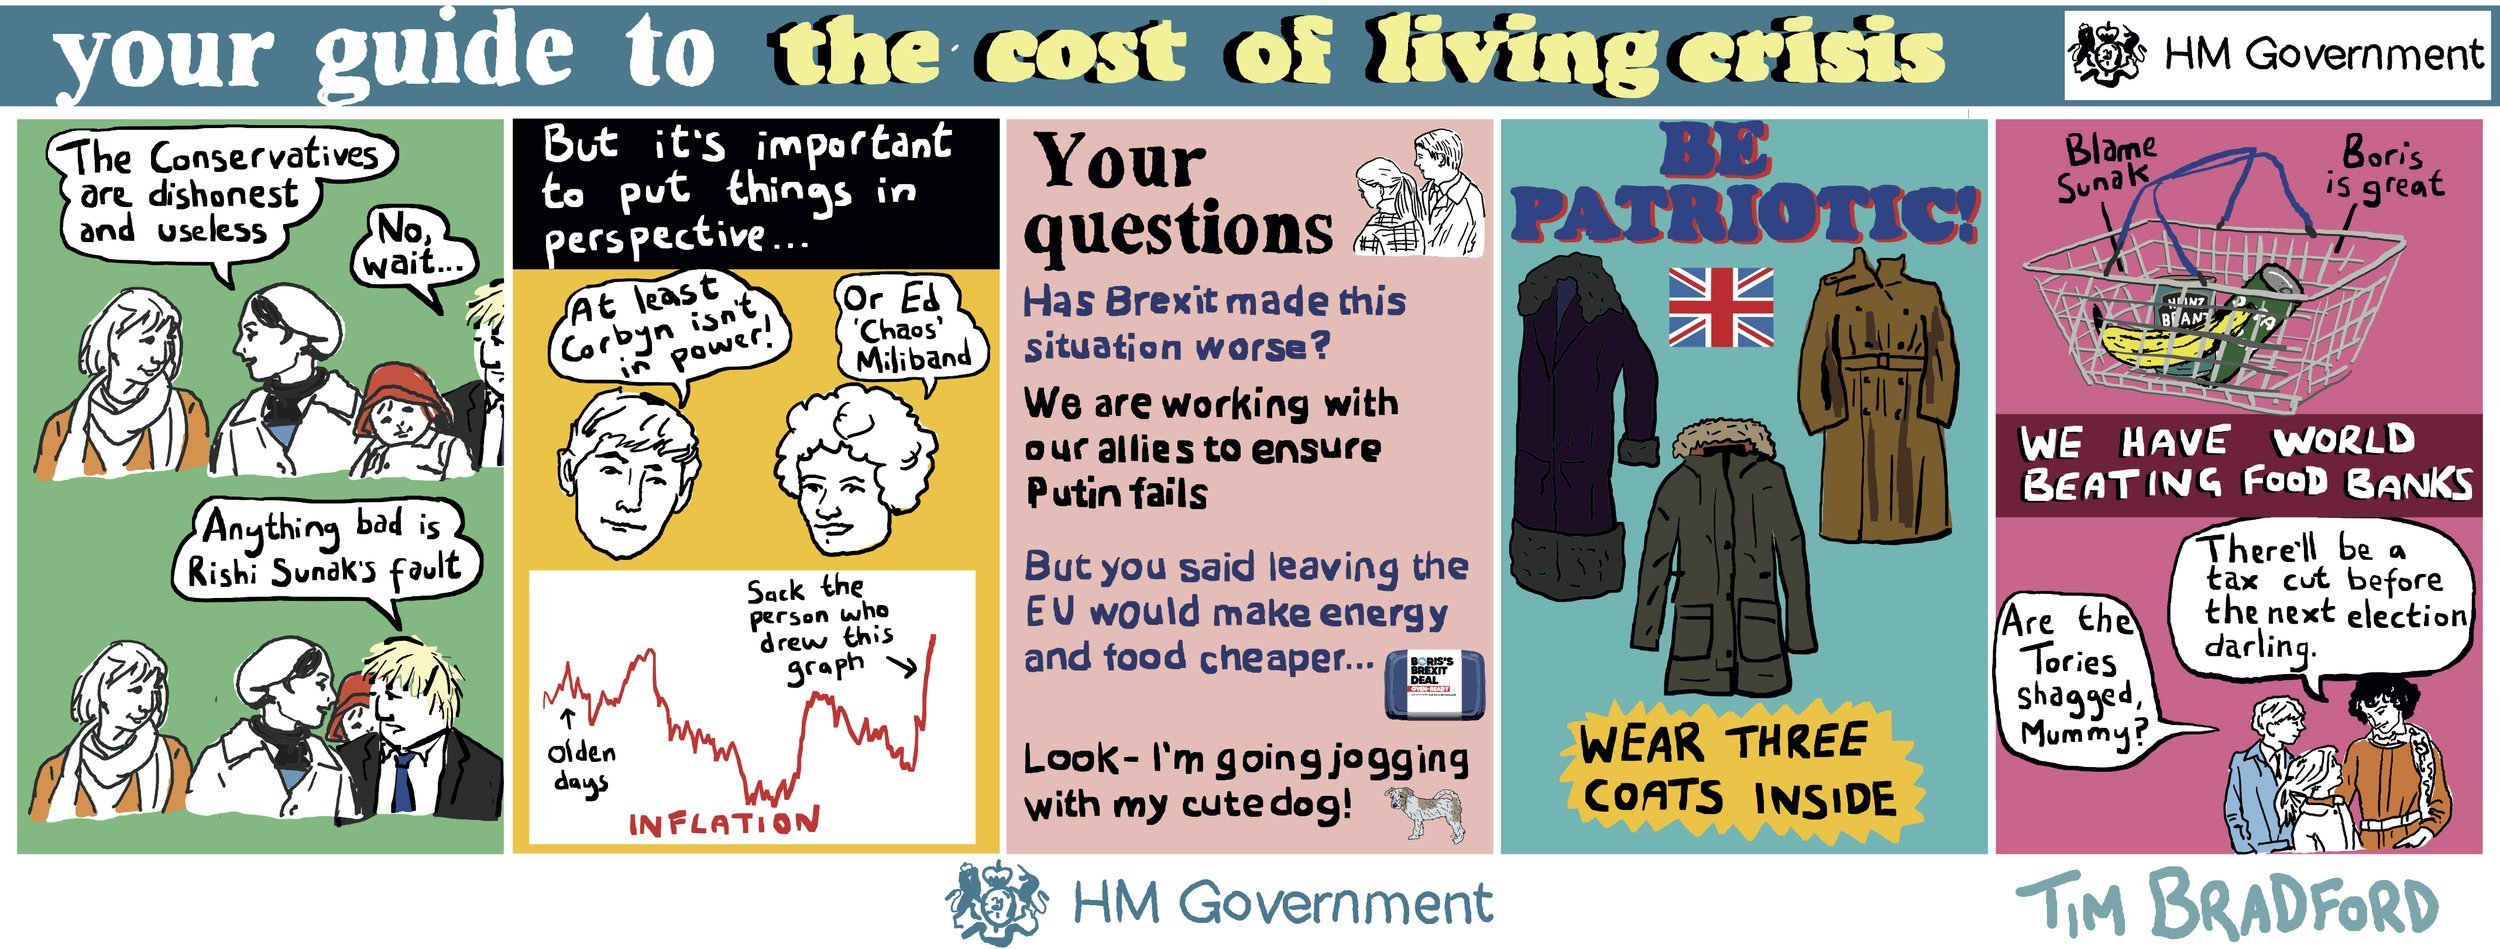 Your guide to the cost of living crisis - 04/04/2022